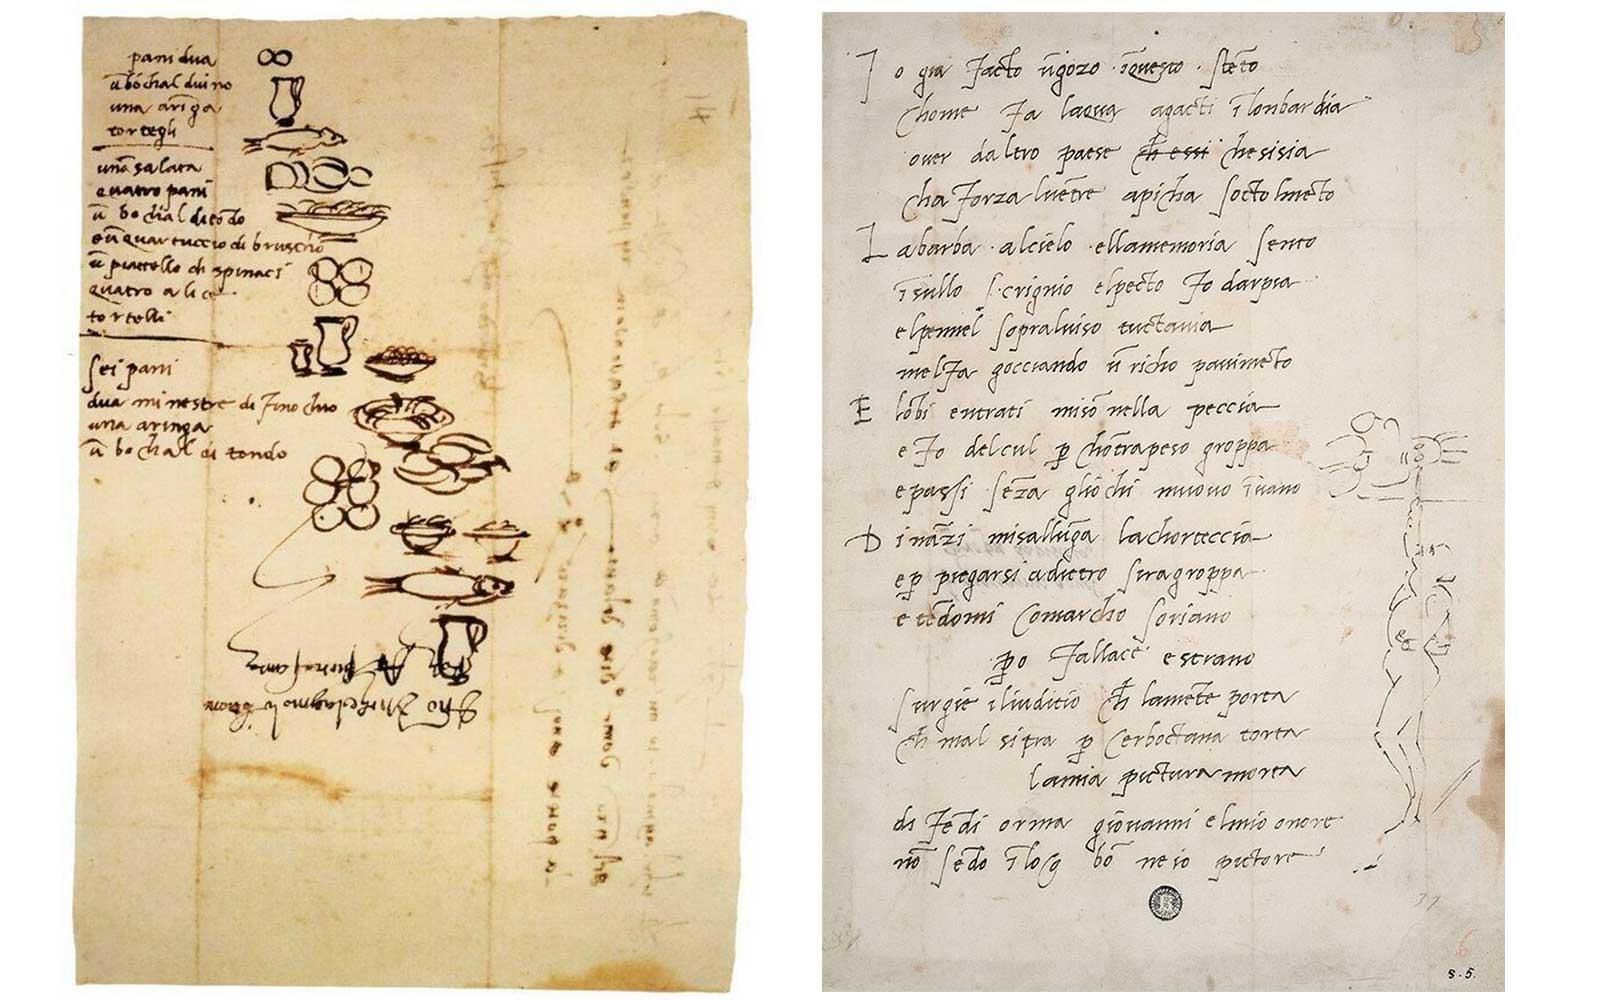 Michelangelo shopping list (left). One of Michelangelo's sonnets, this one features a caricature of the artist painting the Sistine Chapel Ceiling (right).